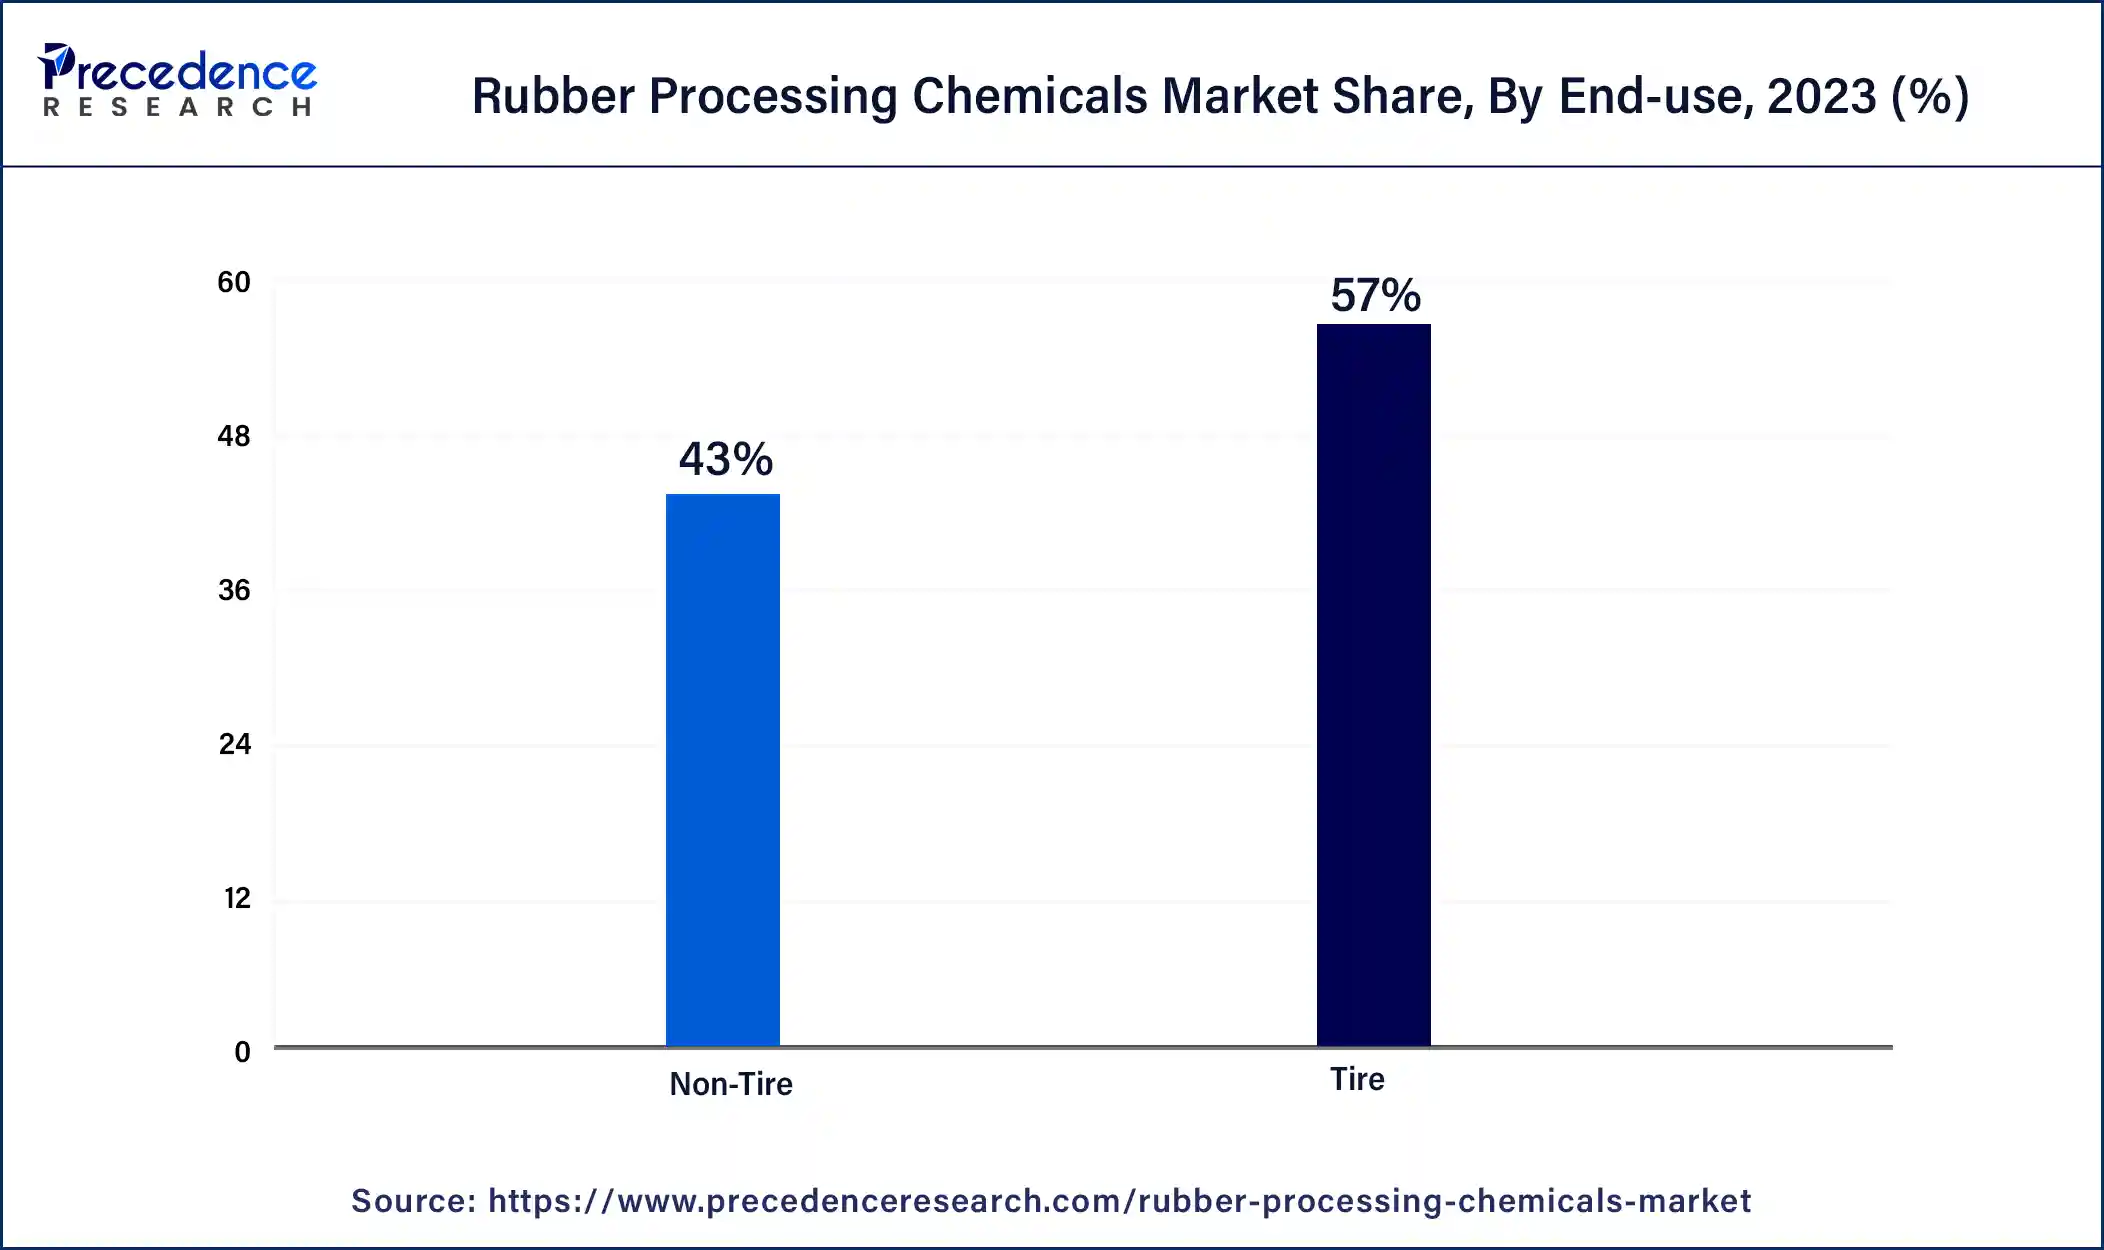 Rubber Processing Chemicals Market Share, By End-use, 2023 (%)